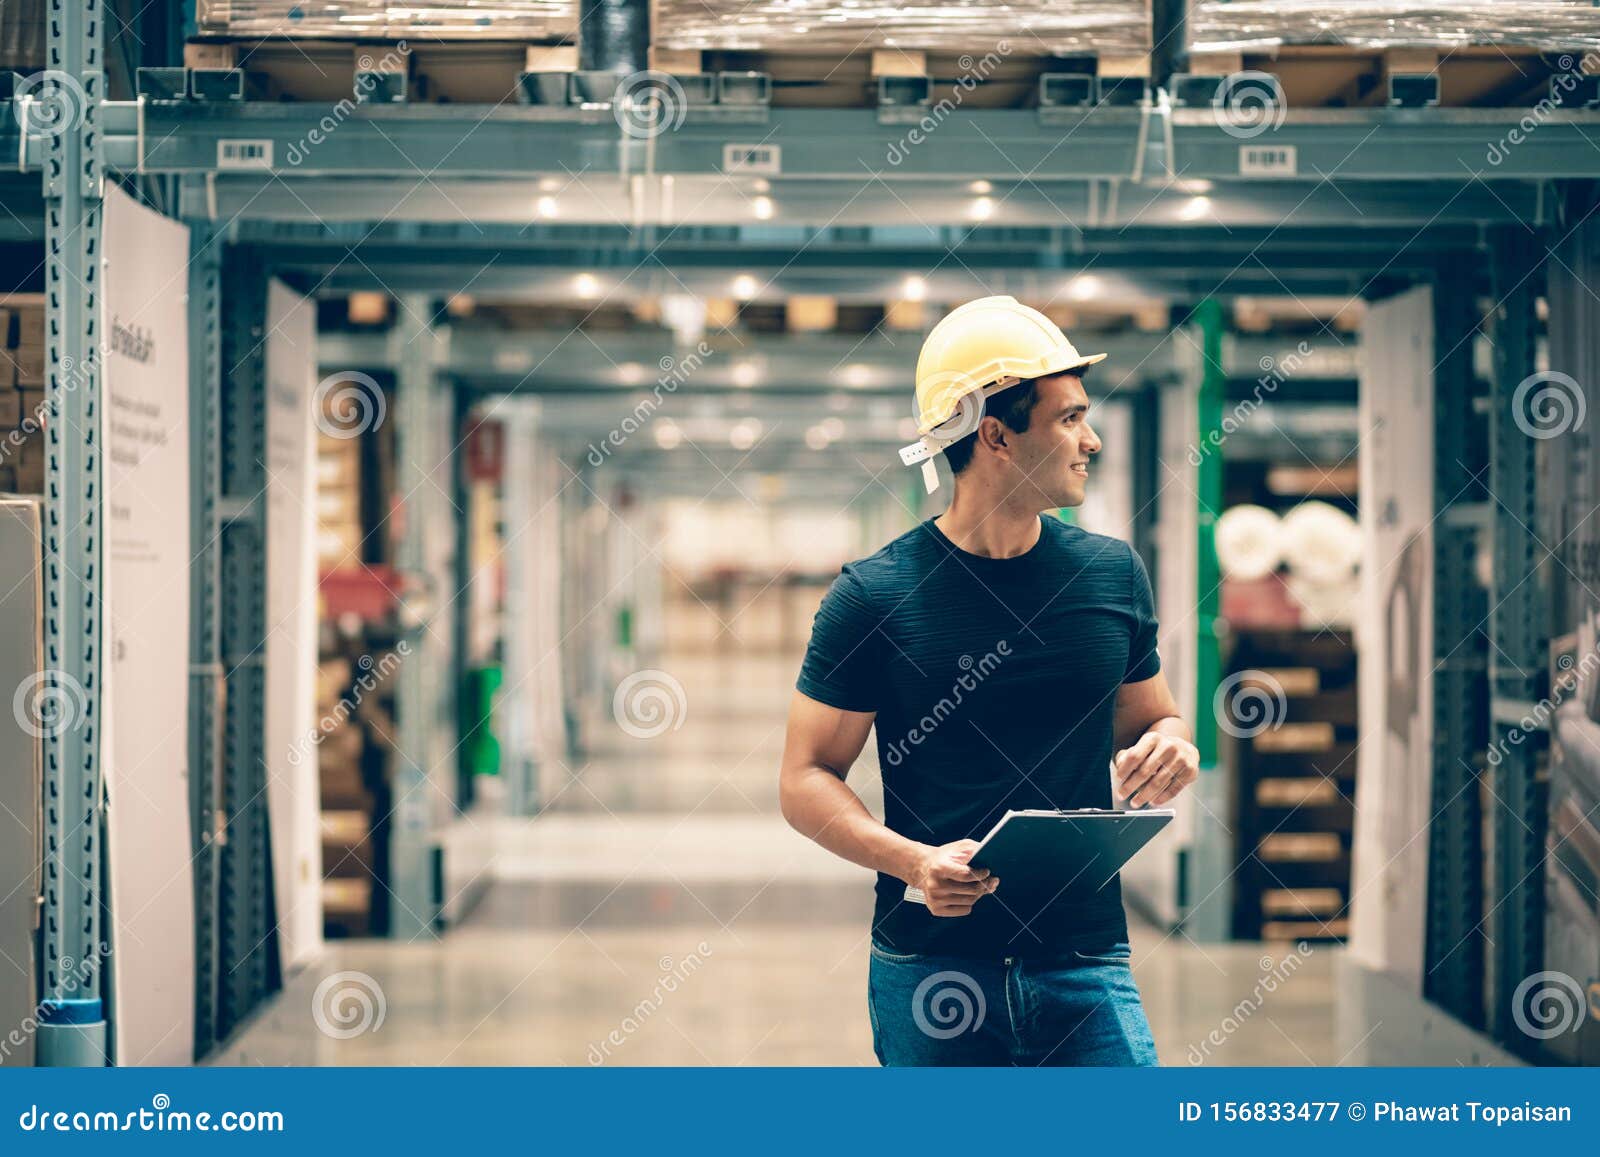 smart indian engineer man worker wearing safety helmet doing stocktaking of product management in cardboard box